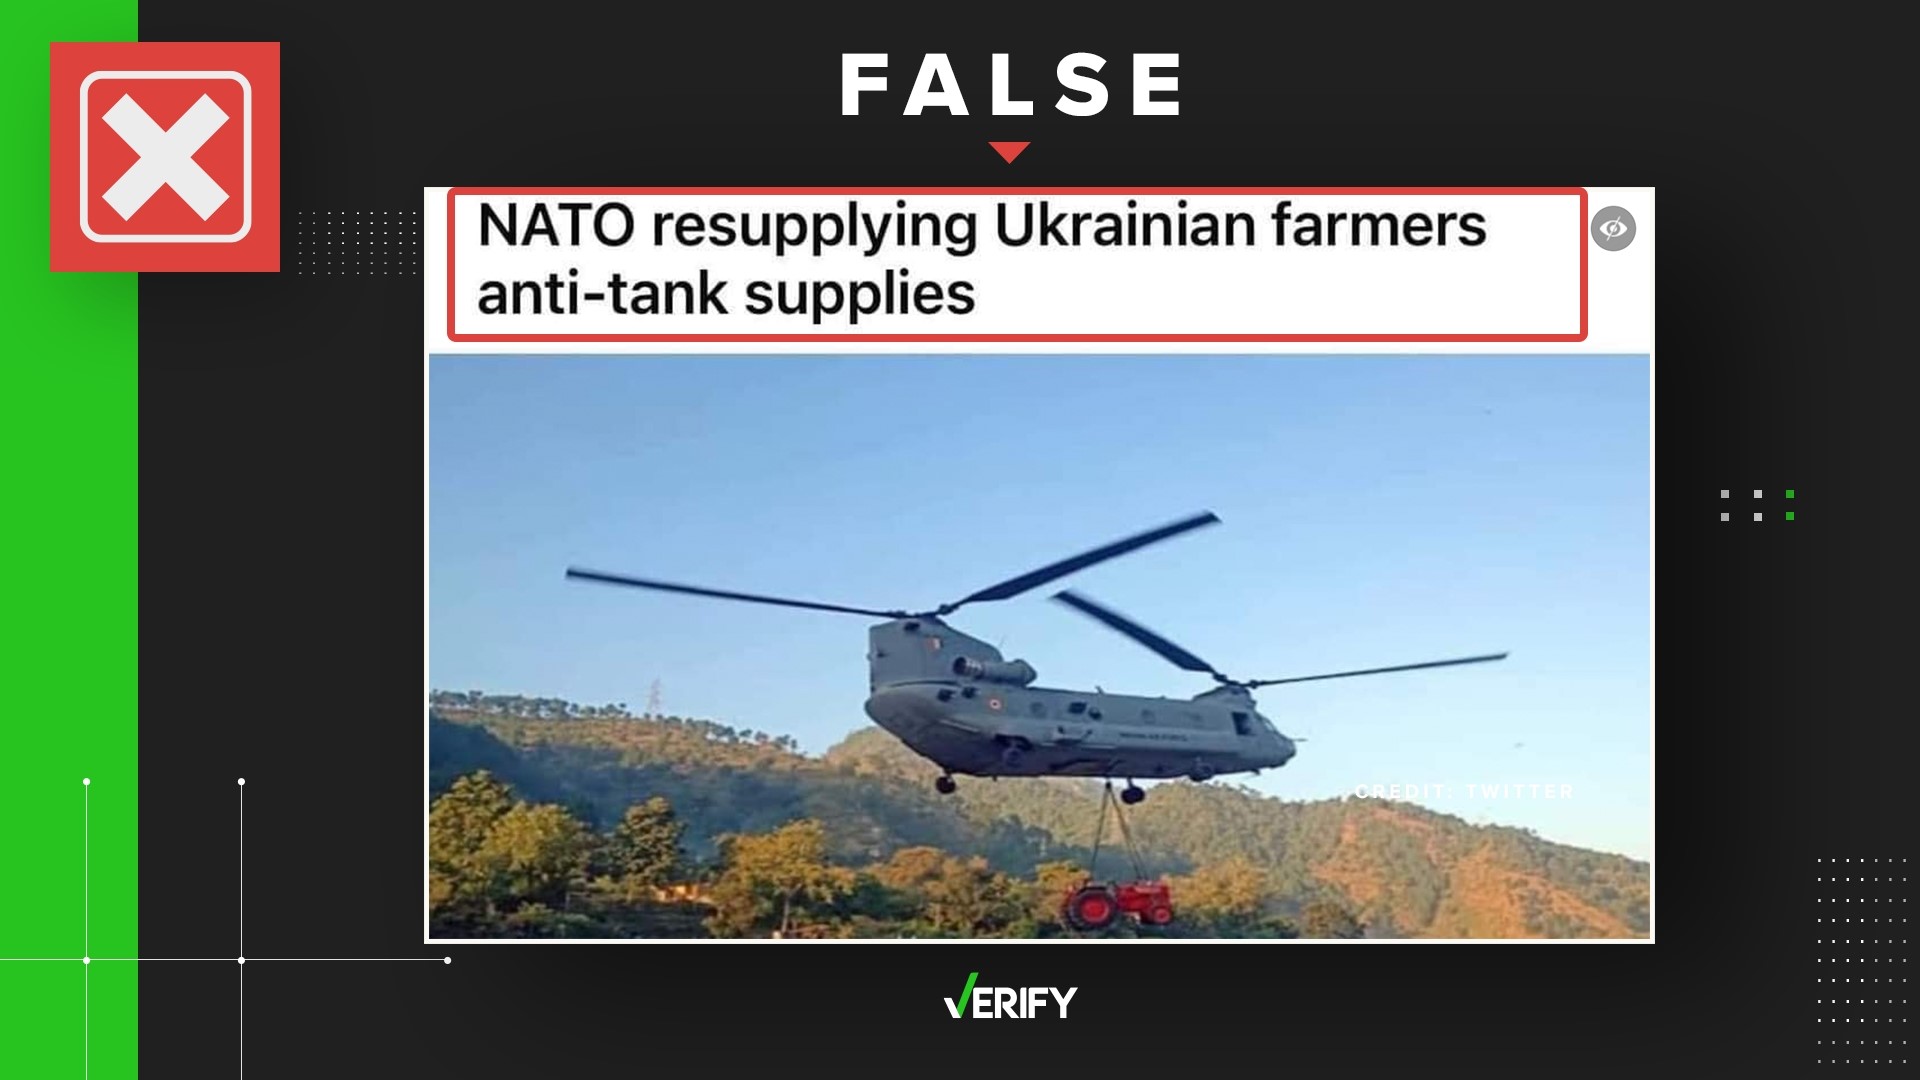 Does this viral image show a NATO helicopter delivering a tractor to Ukrainian farmers?  The VERIFY team confirms this is false.